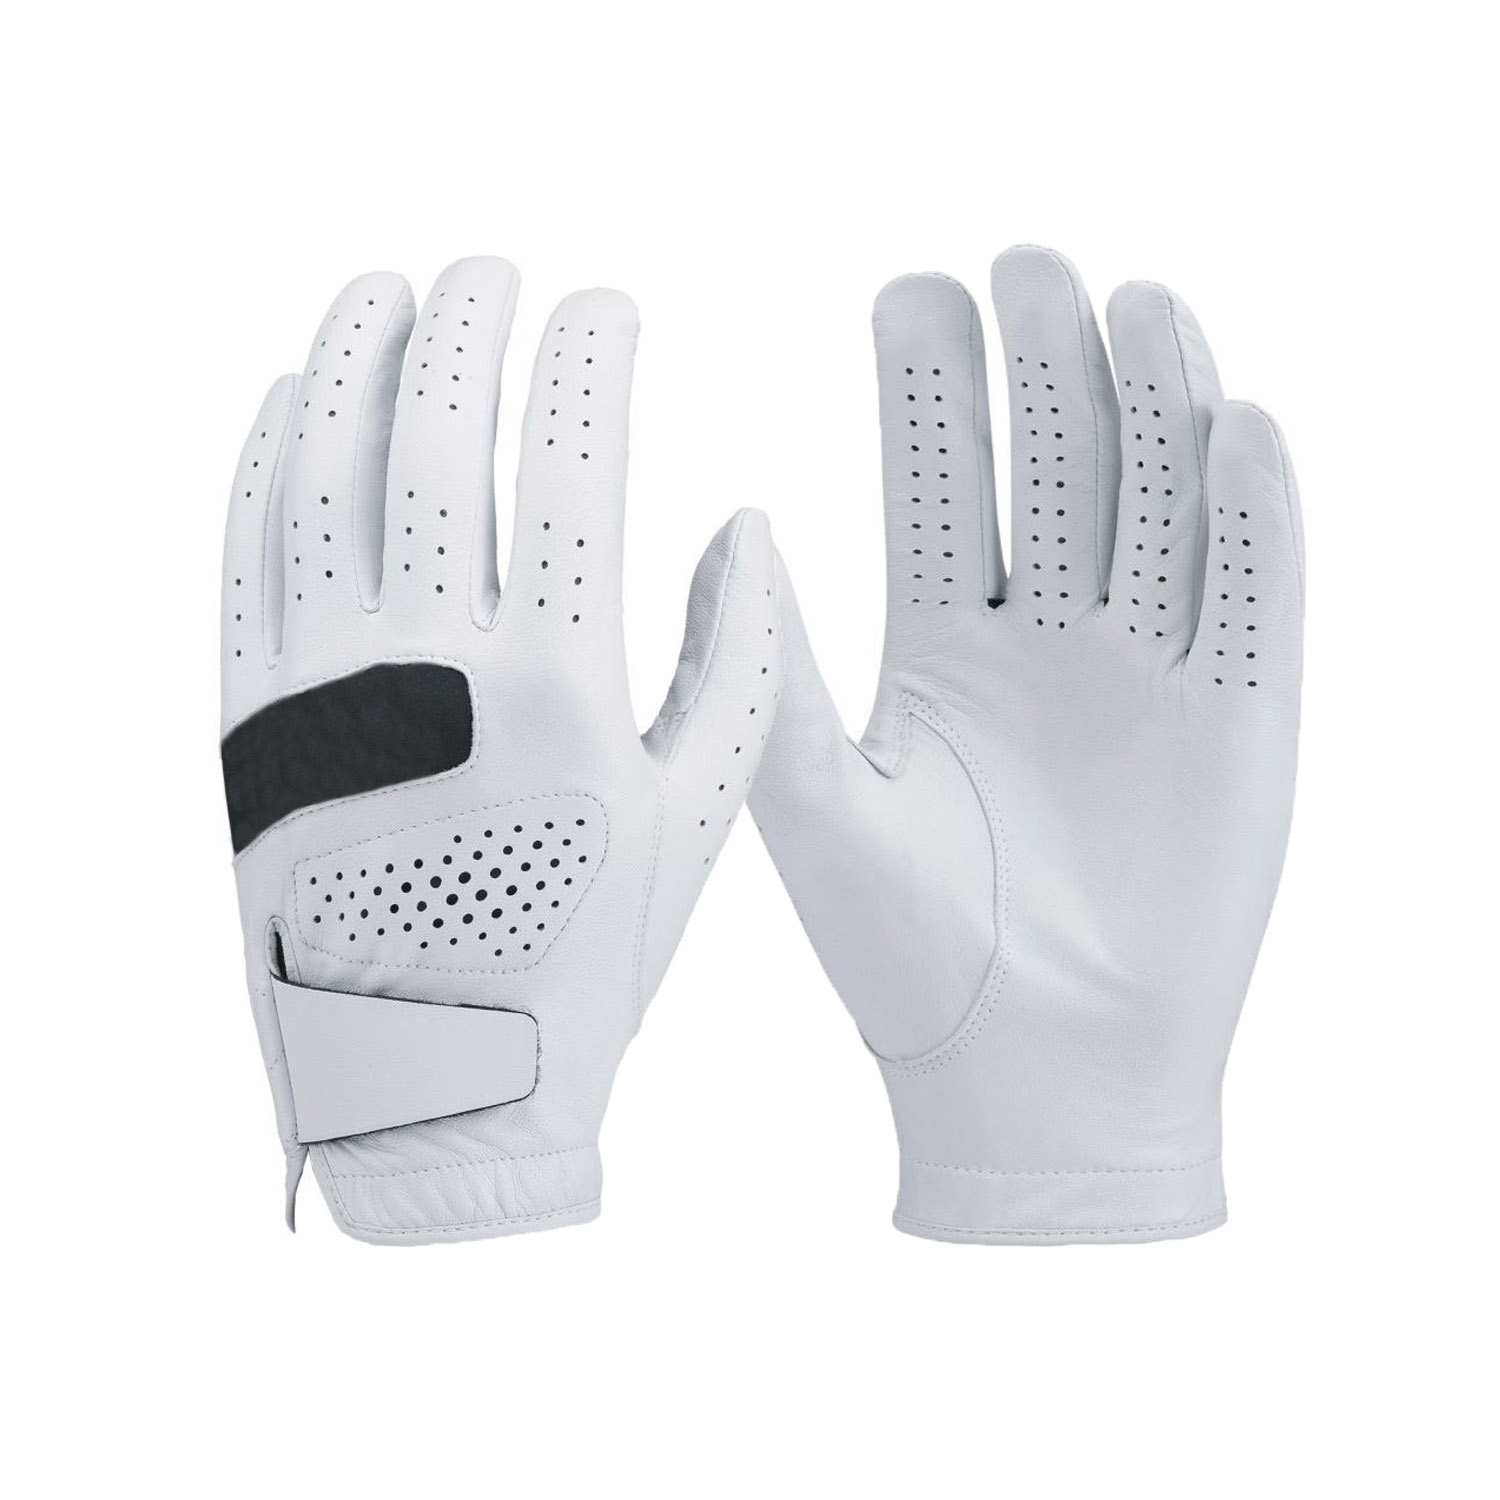 hot sale white Cabretta leather Golf gloves popular style for man women